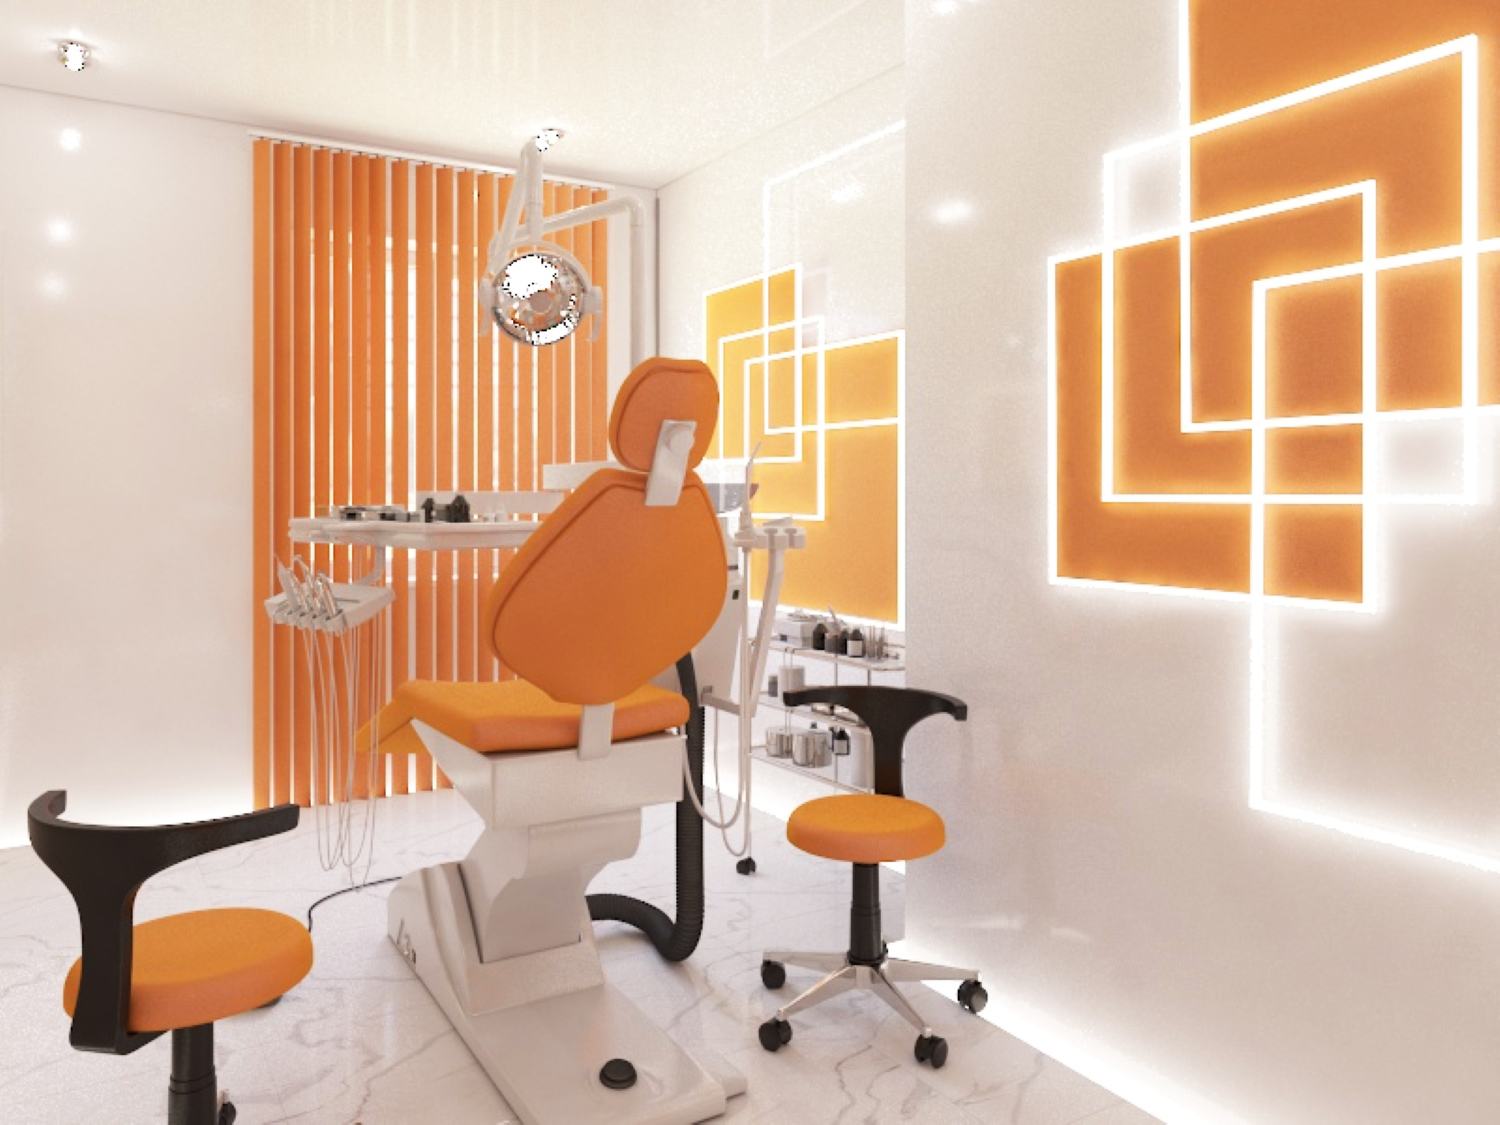 Clinica dentale "dentale" in 3d max vray 3.0 immagine